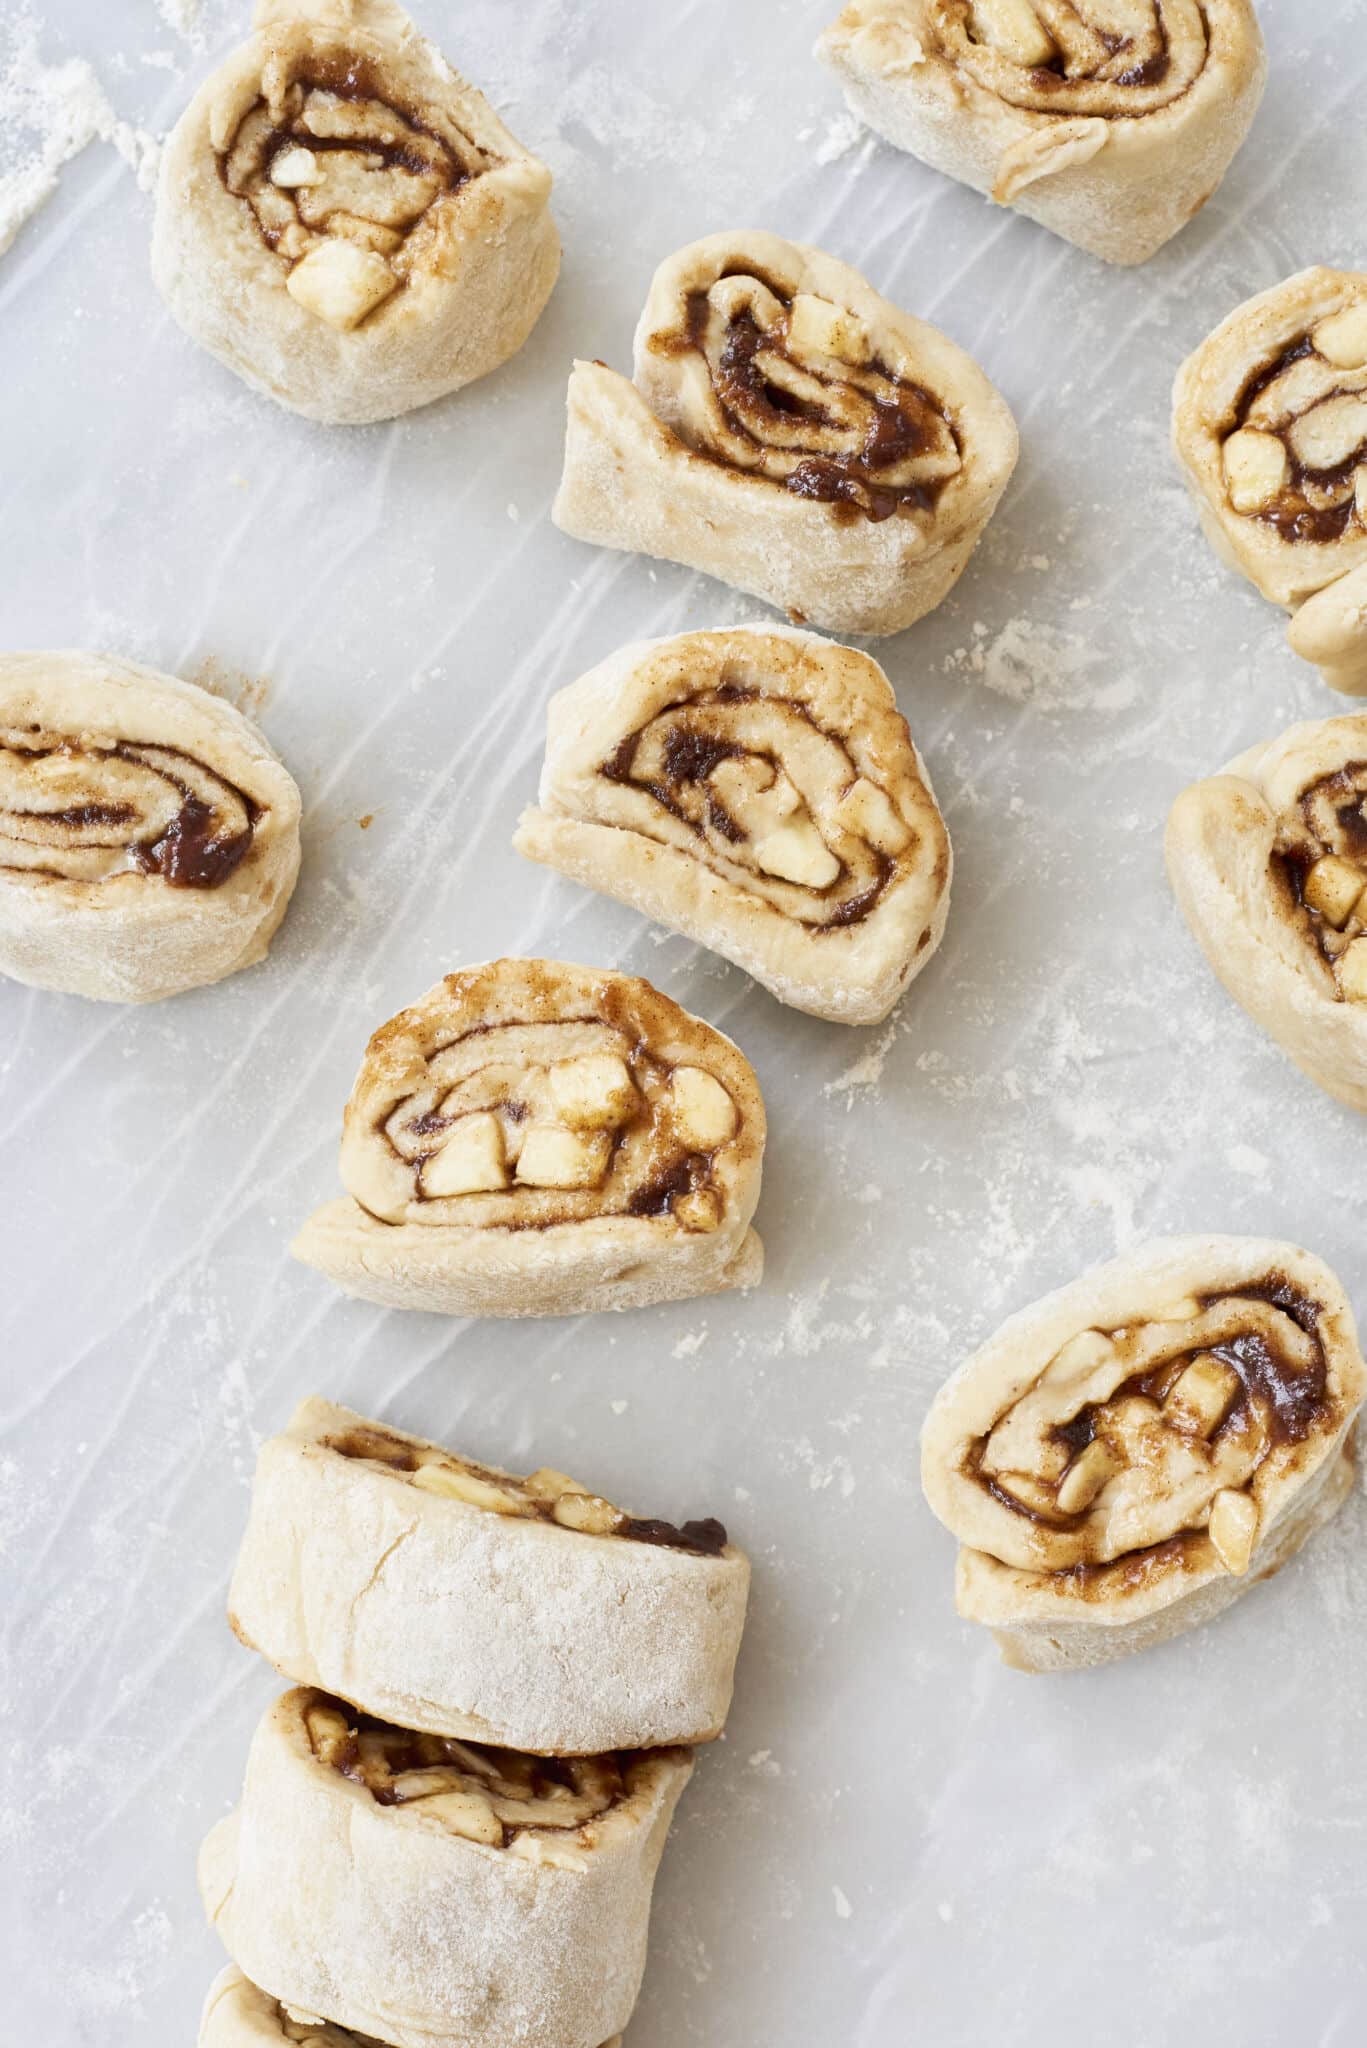 The equally-sized individual small logs are on a floured surface, with fresh bananas and gooey cinnamon sugar filling facing up. 